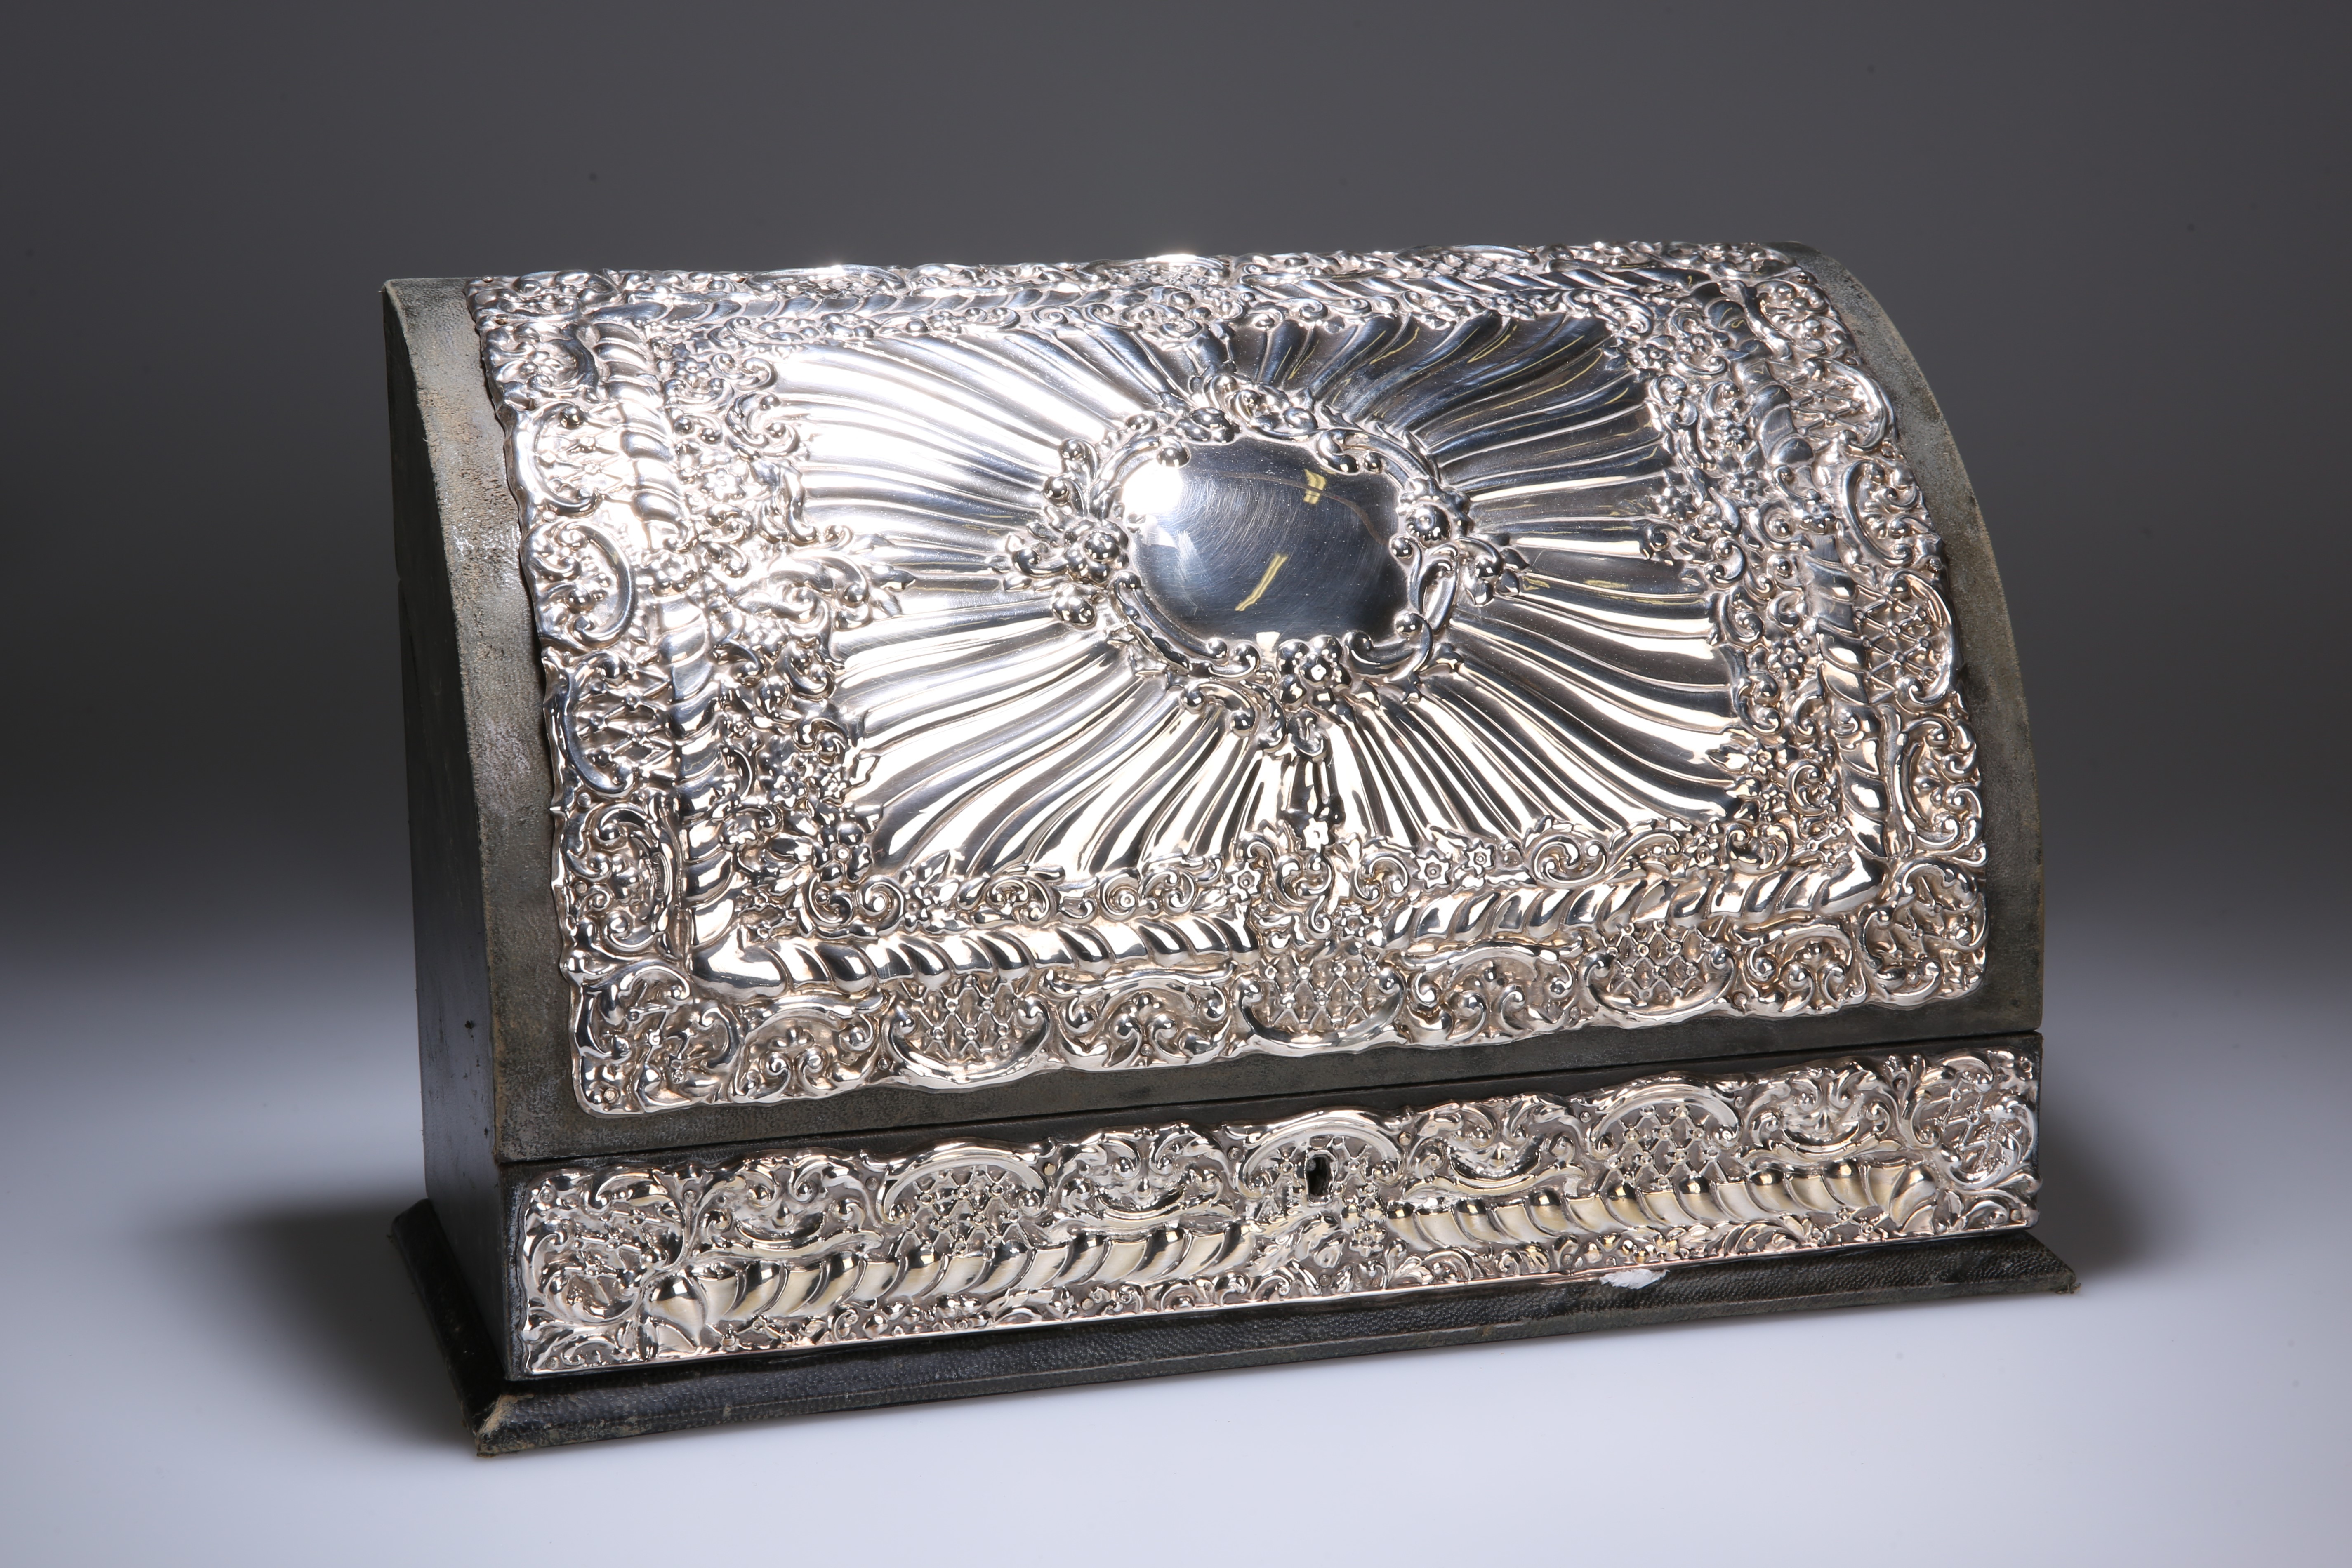 A SILVER-MOUNTED STATIONERY BOX IN 19th CENTURY STYLE